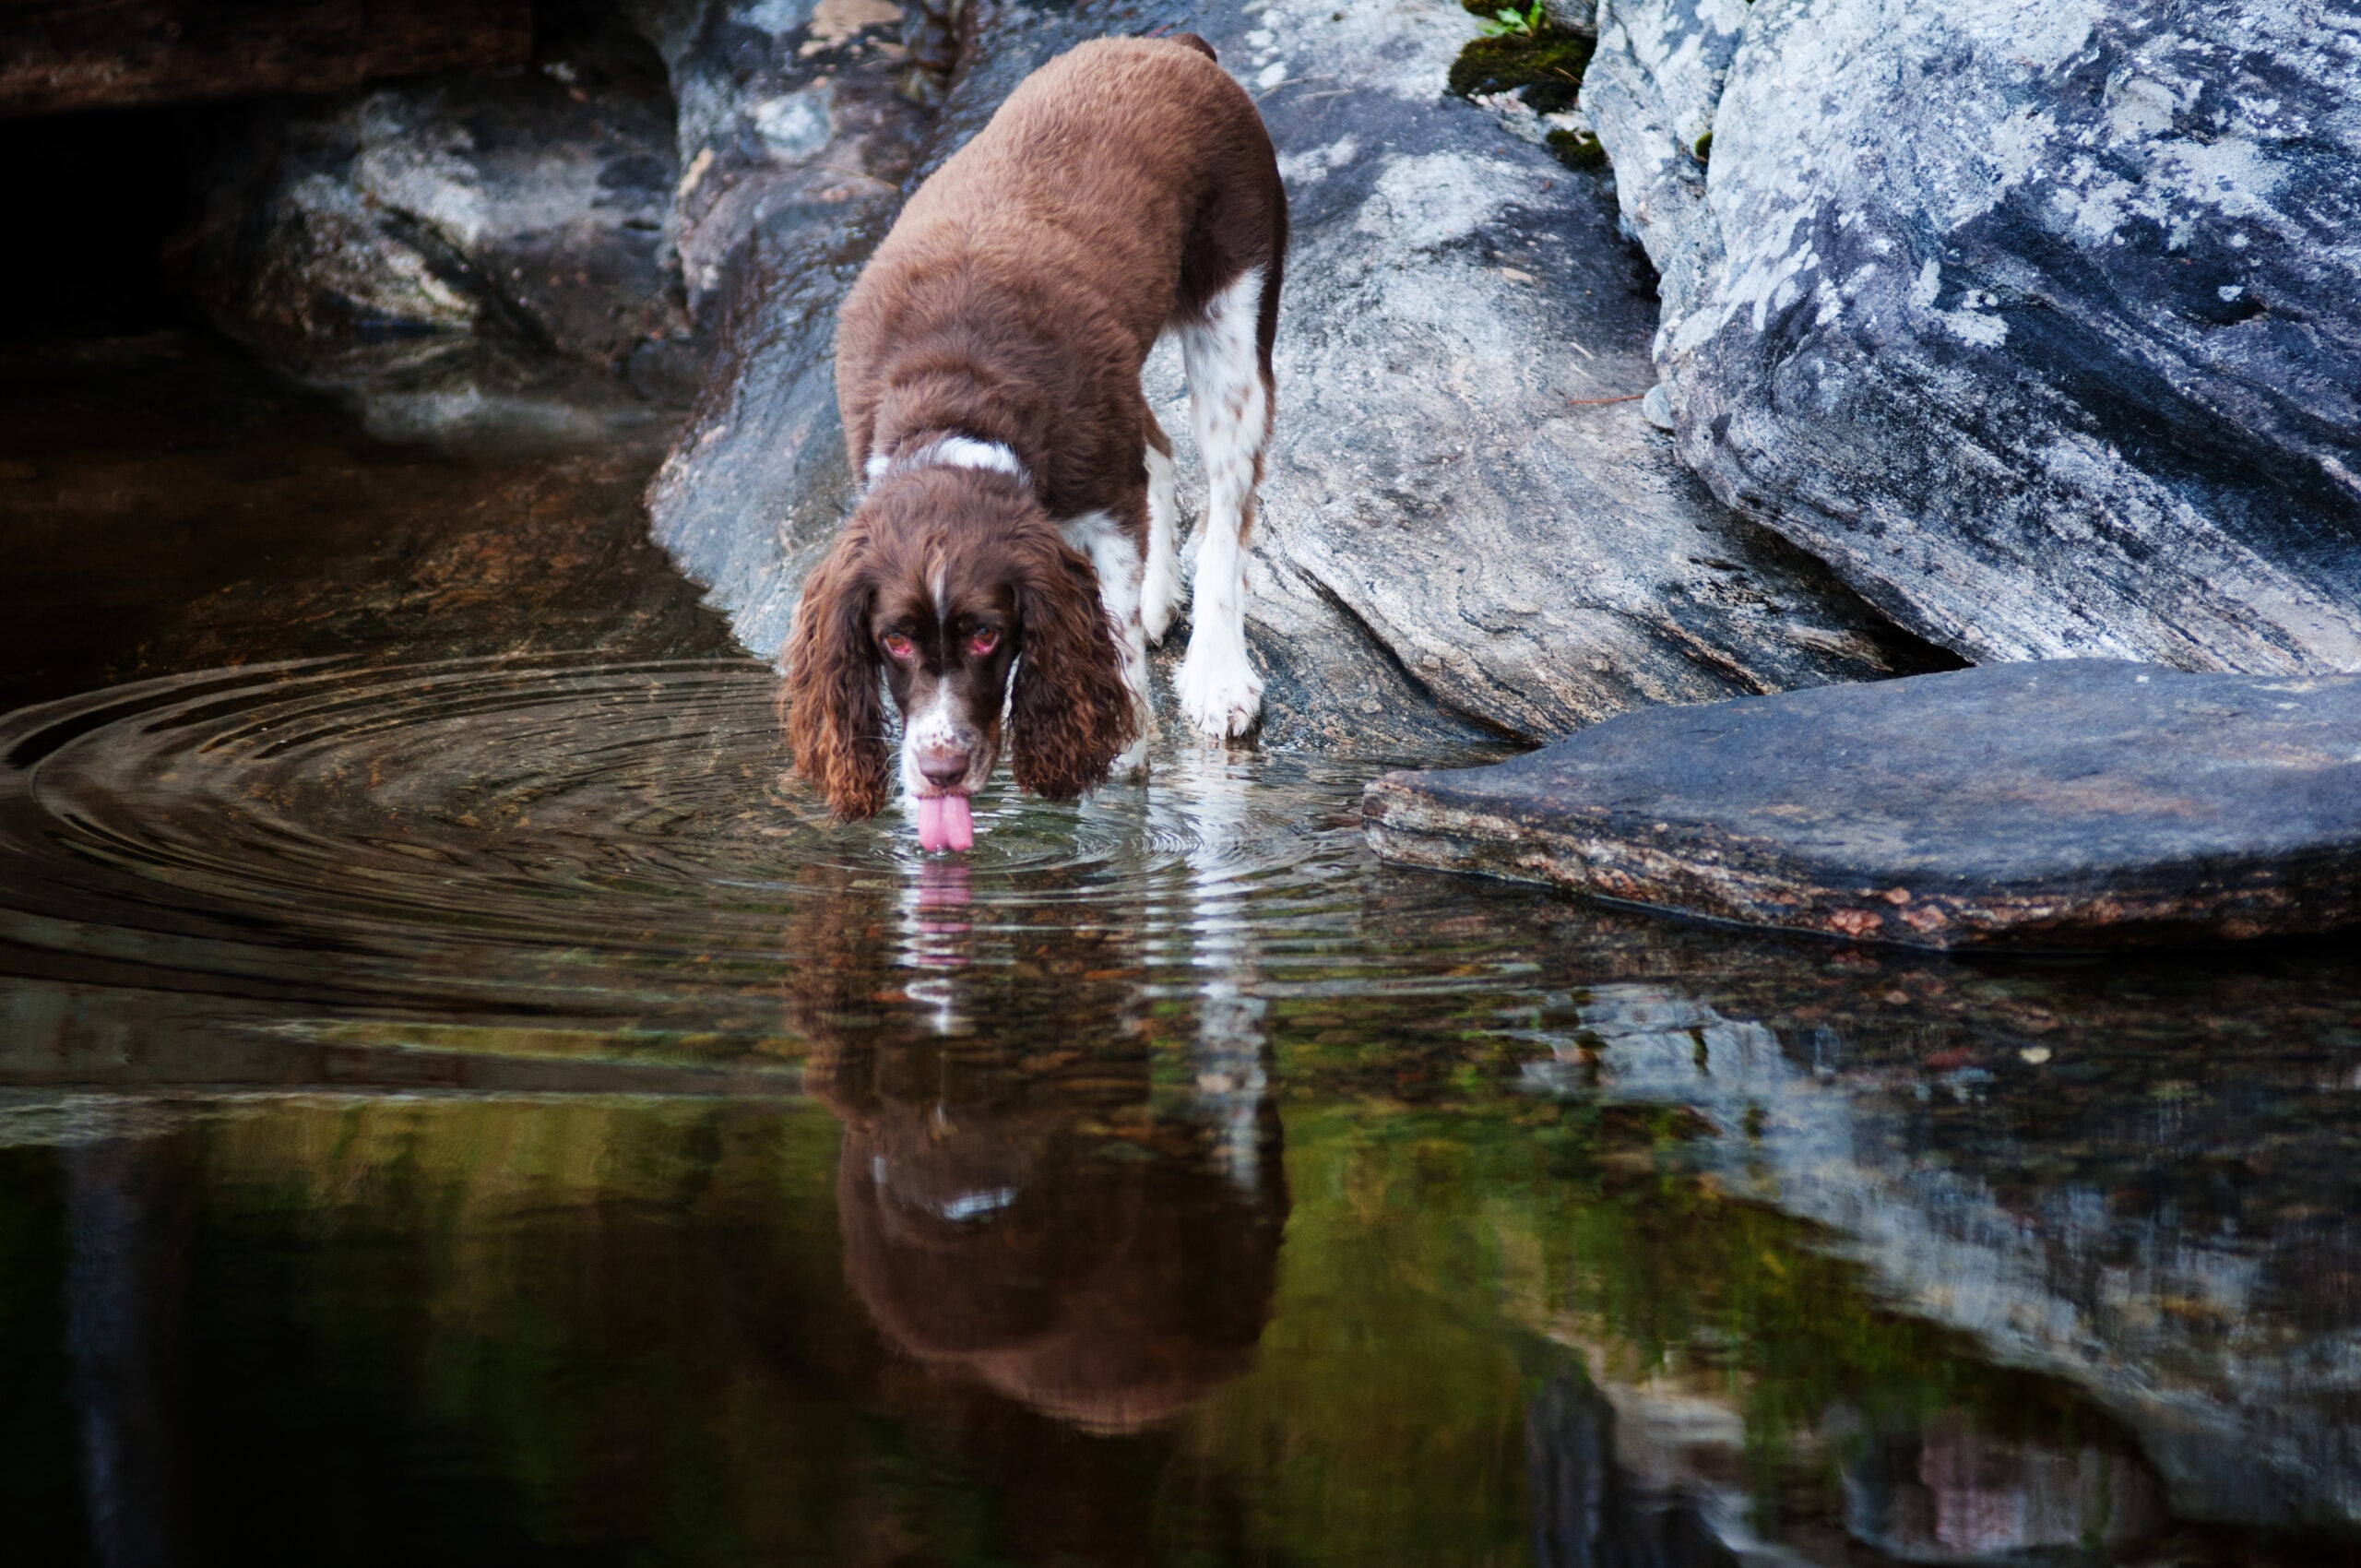 photo of dog in cooling off in water to avoid dehydration and heatstroke